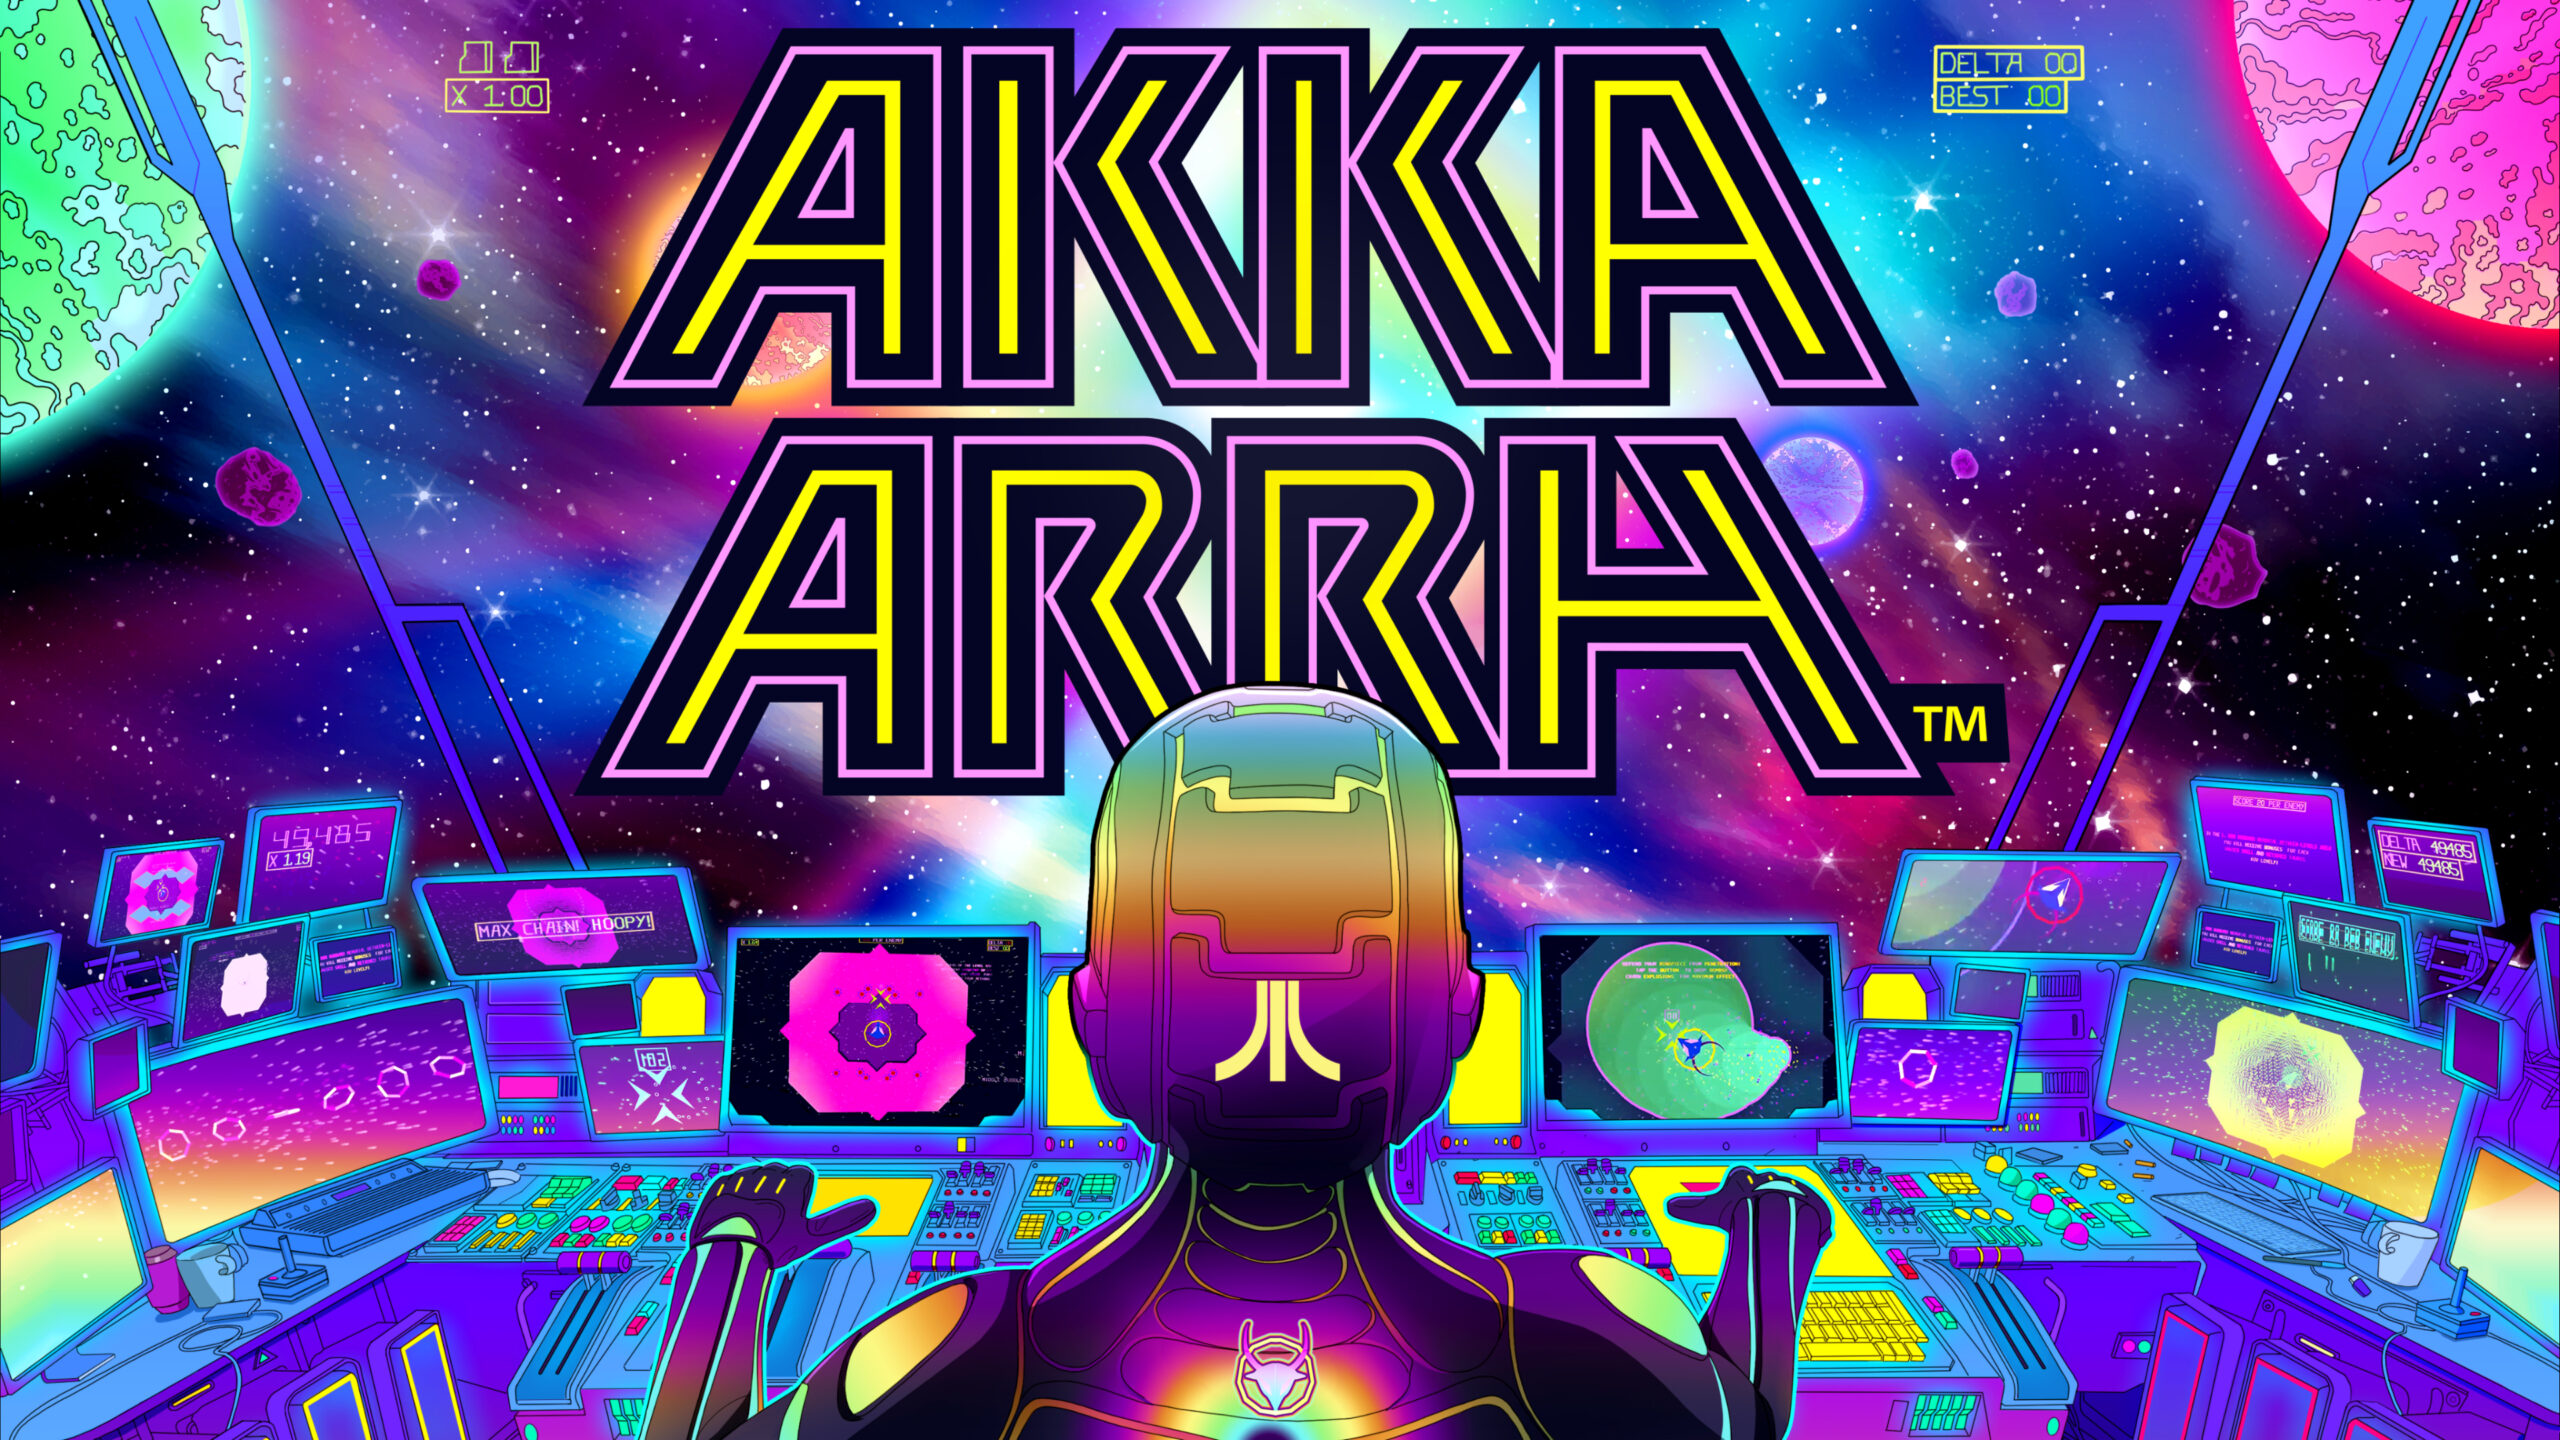 Feed Your Head to a New Kind of Web in Akka Arrh , the Latest Hypnotic Arcade Wave Shooter from Atari and Legendary Designer Jeff Minter